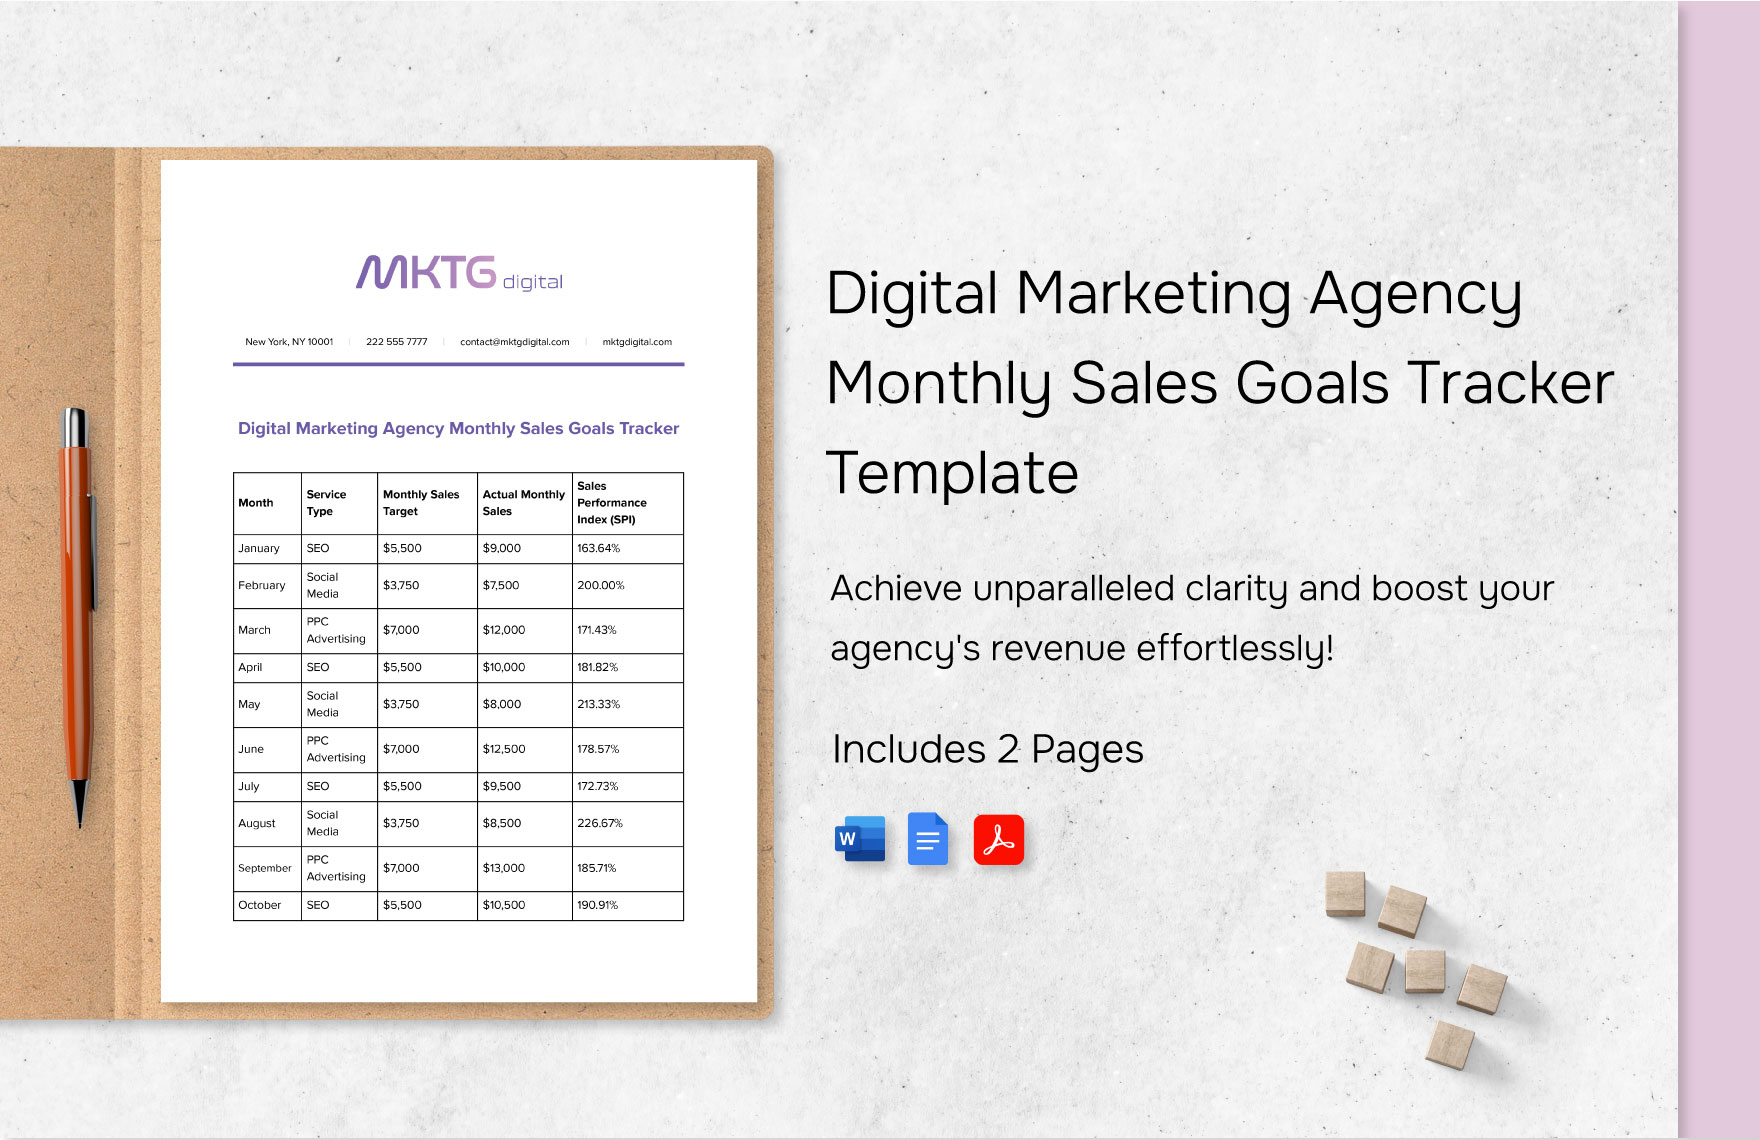 Digital Marketing Agency Monthly Sales Goals Tracker Template